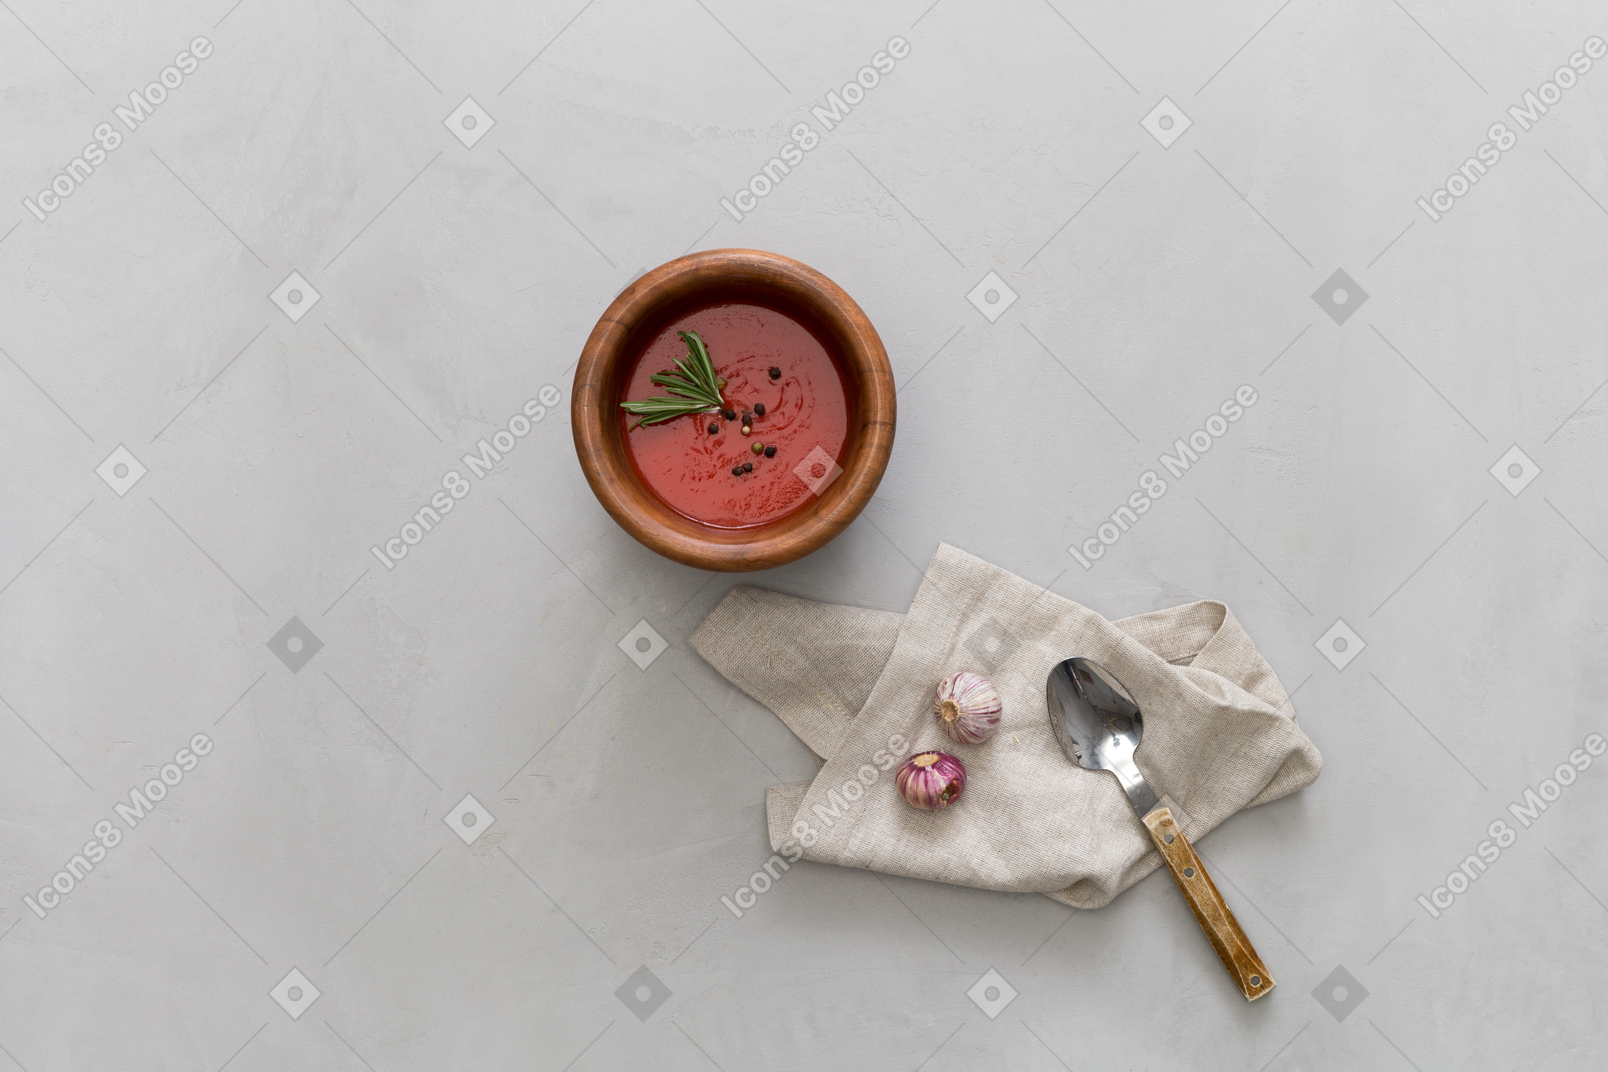 A bowl of gazpacho, some garlic and a spoon